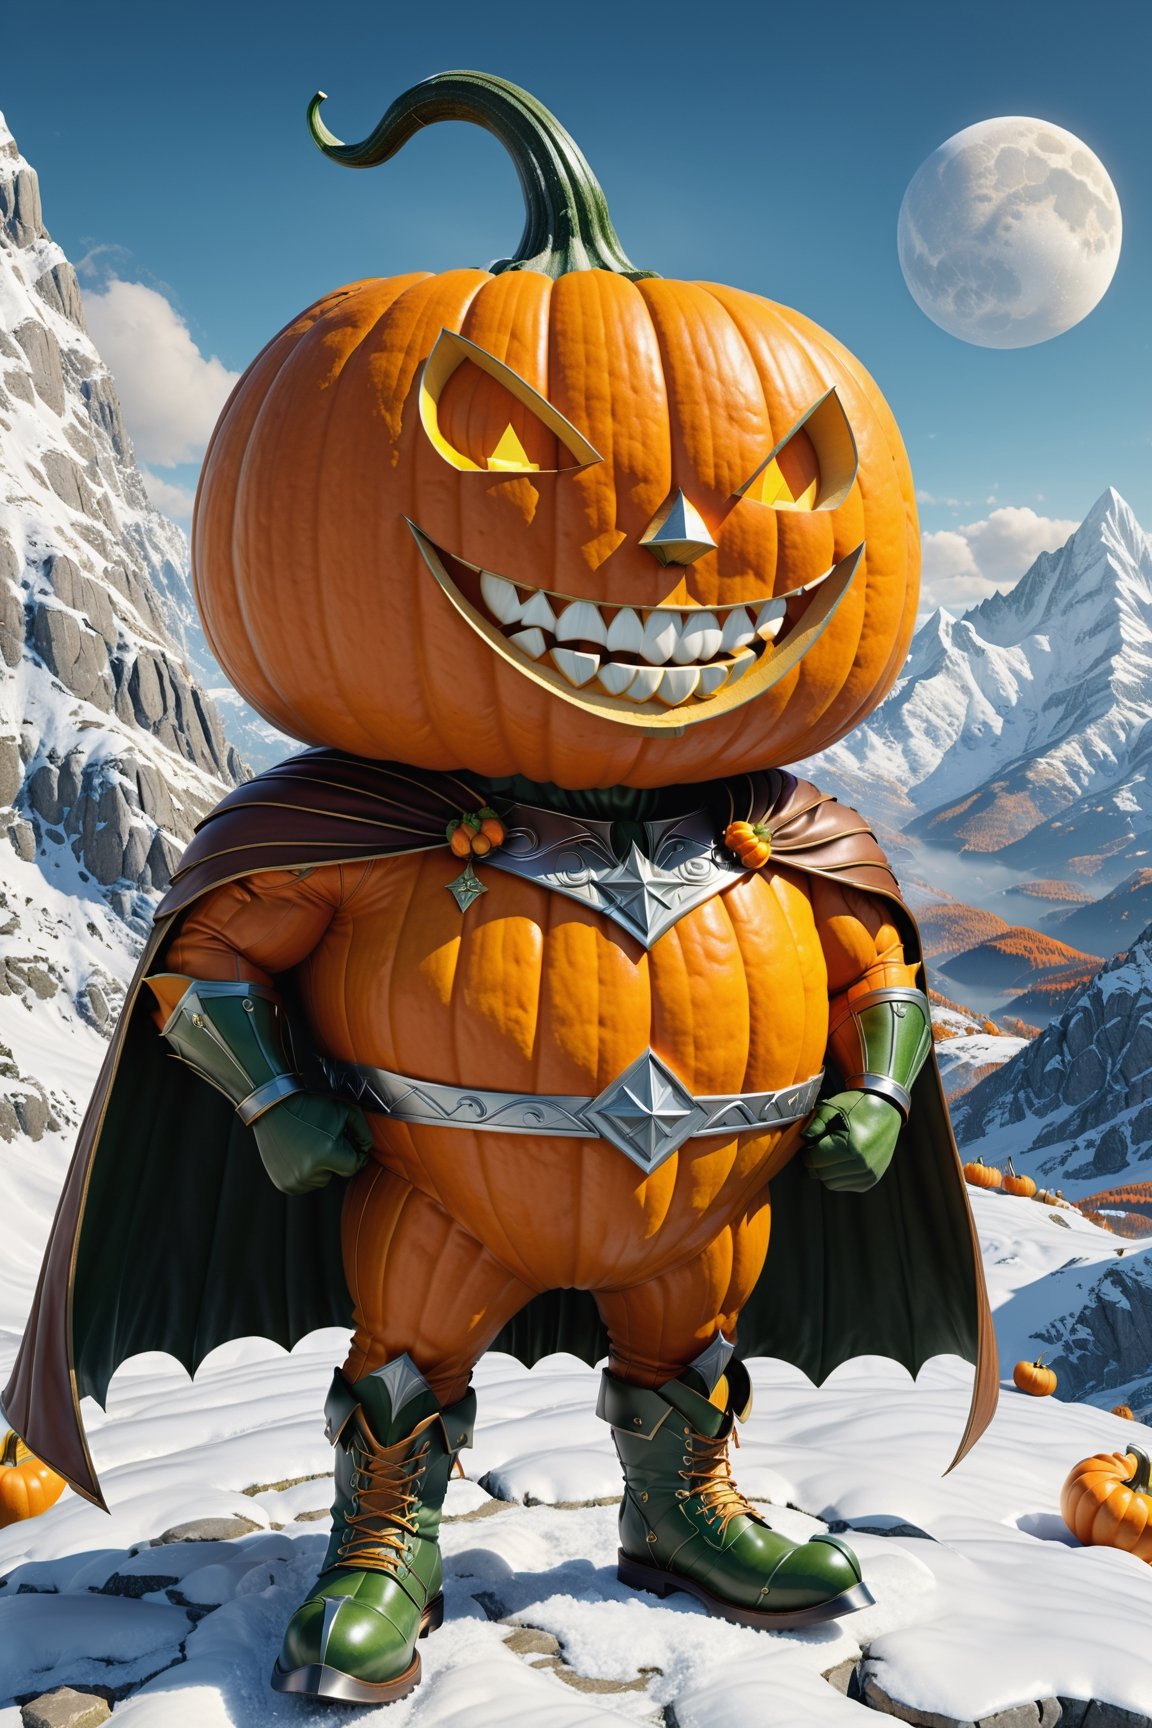 High definition photorealistic render of an incredible and mysterious character of a head mr pumpkin vegetable warrior, with muscles and a big smile, with boots and capes, in a mountains snow, with luxurious details in marble and metal and details in parametric architecture and art deco, the vegetable It must be the head of the character full body pose themed pumpkin themed costumes, magical phantasy